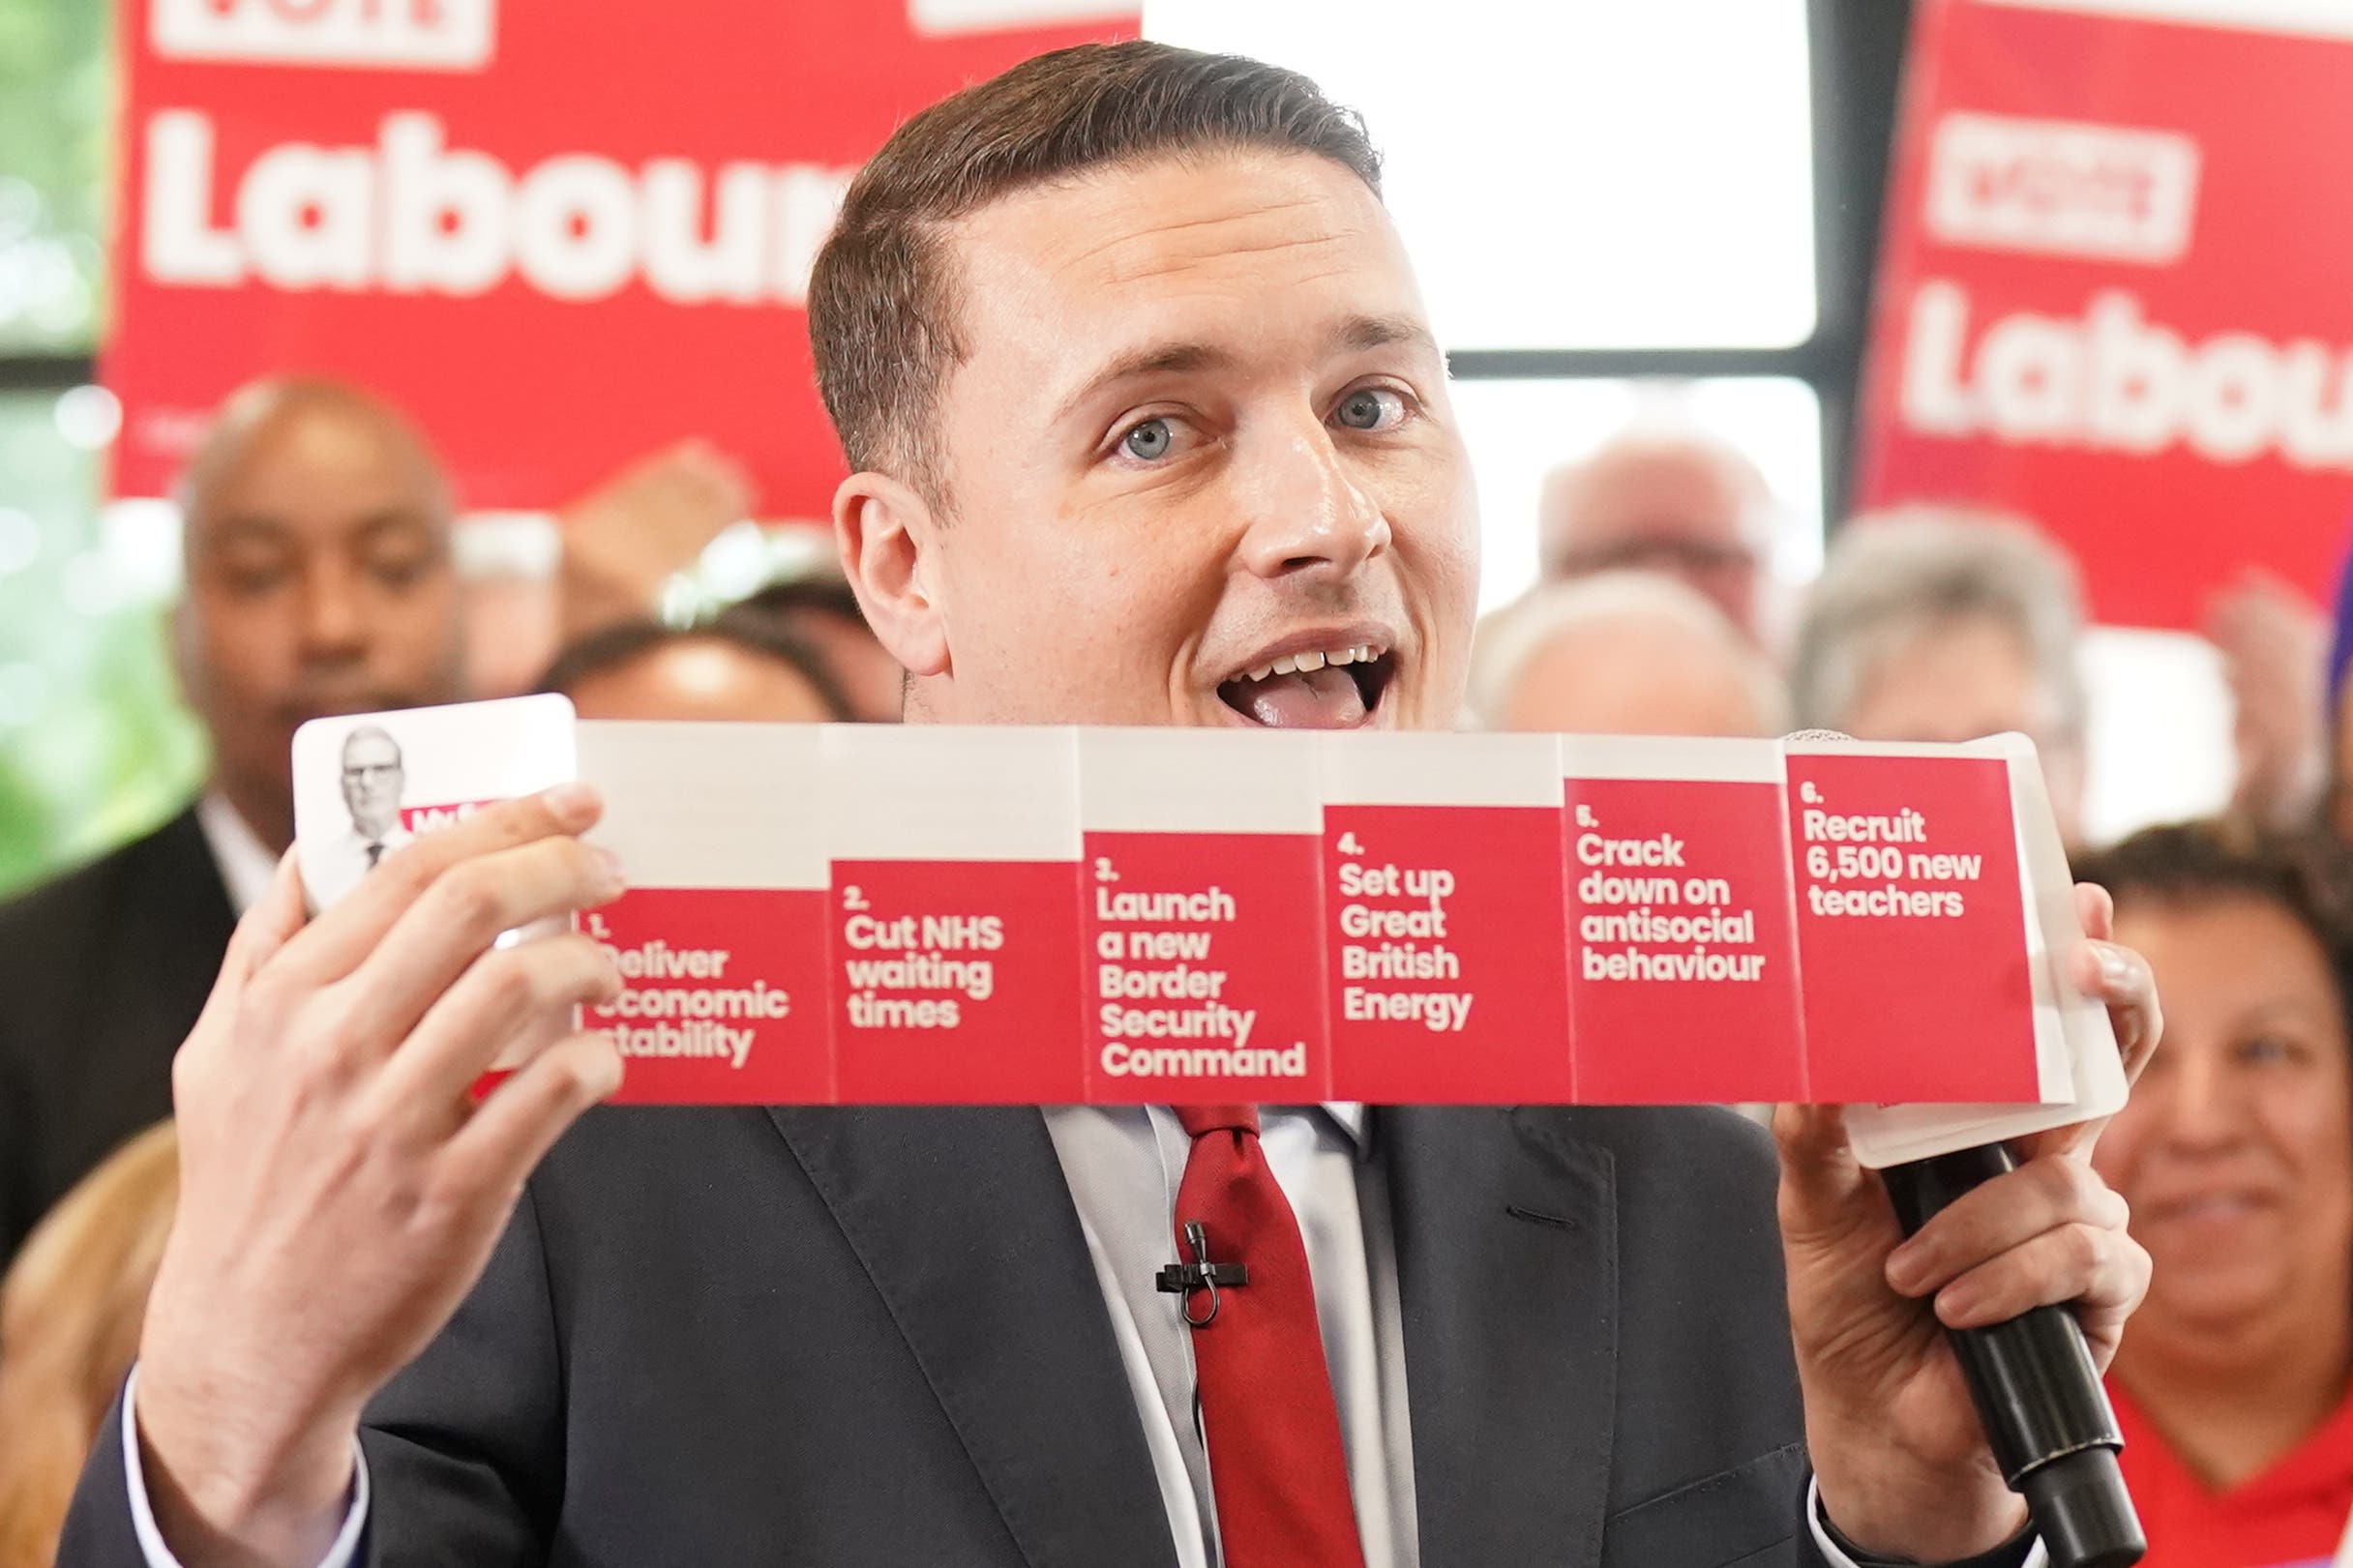 Mr Streeting wants political parties to work together in the future on wider social care reform